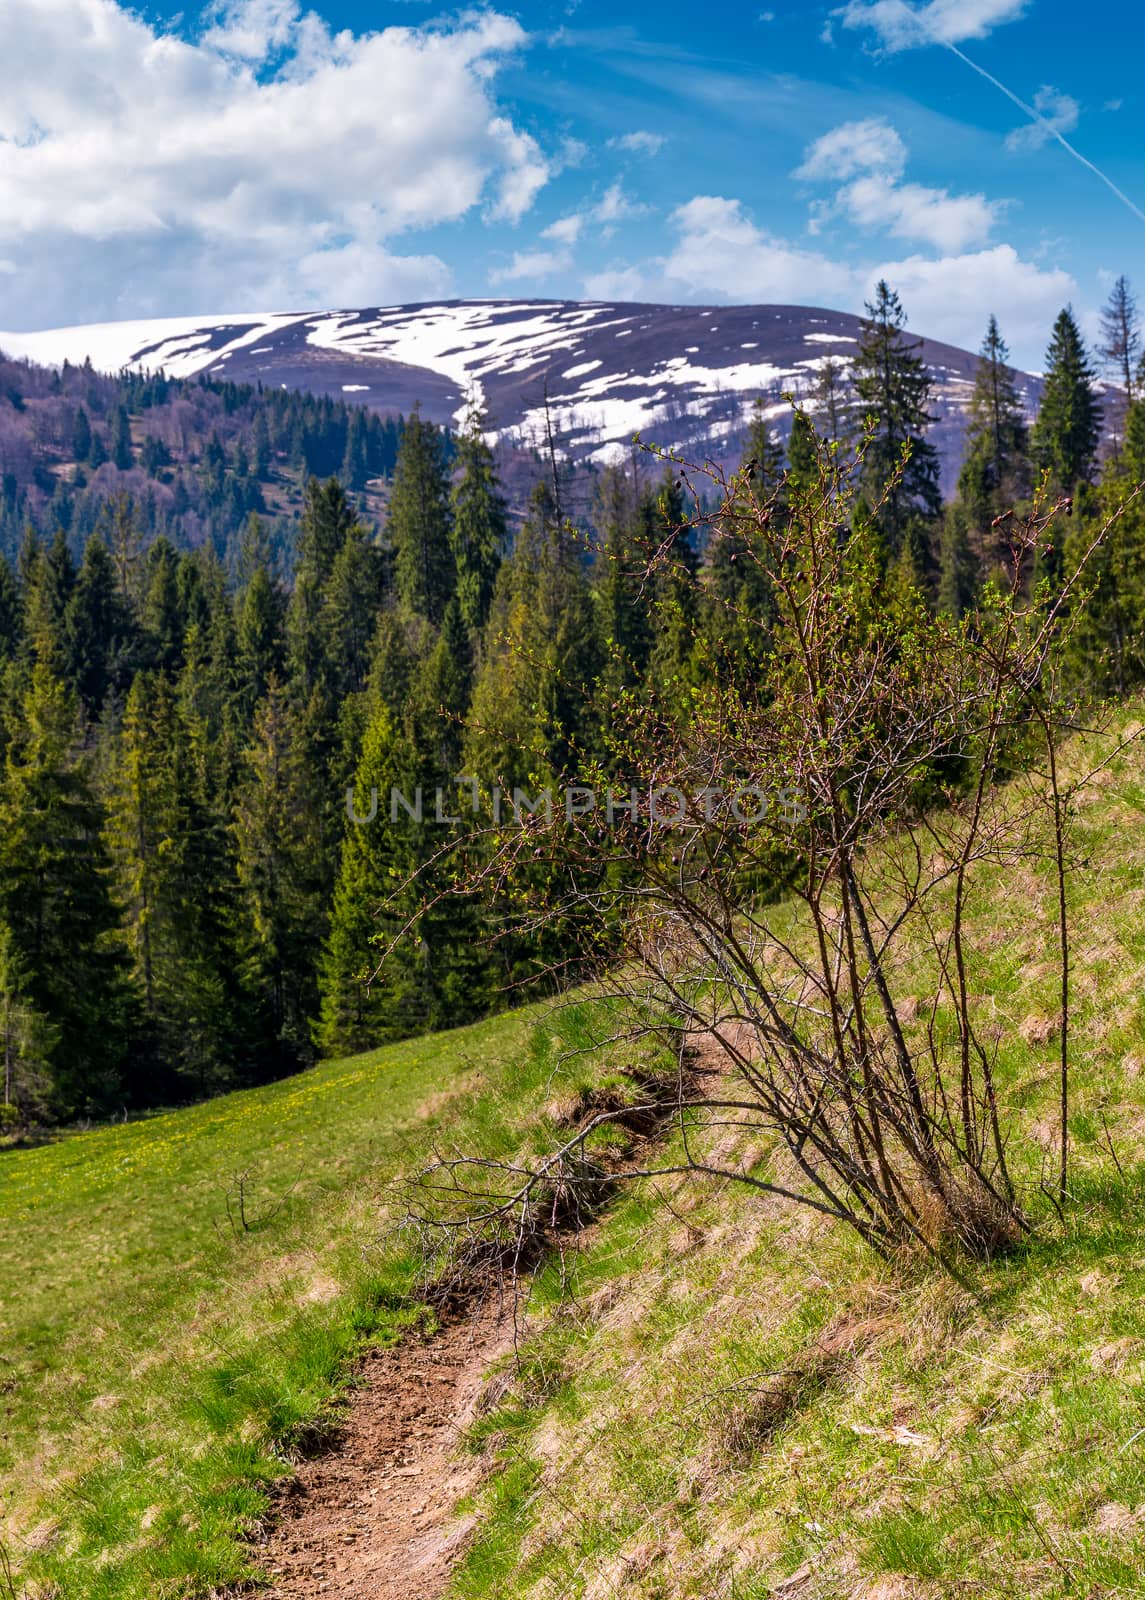 beautiful nature scenery in springtime. bush and a footpath on a grassy hillside. forest and mountain with snowy tops on the background